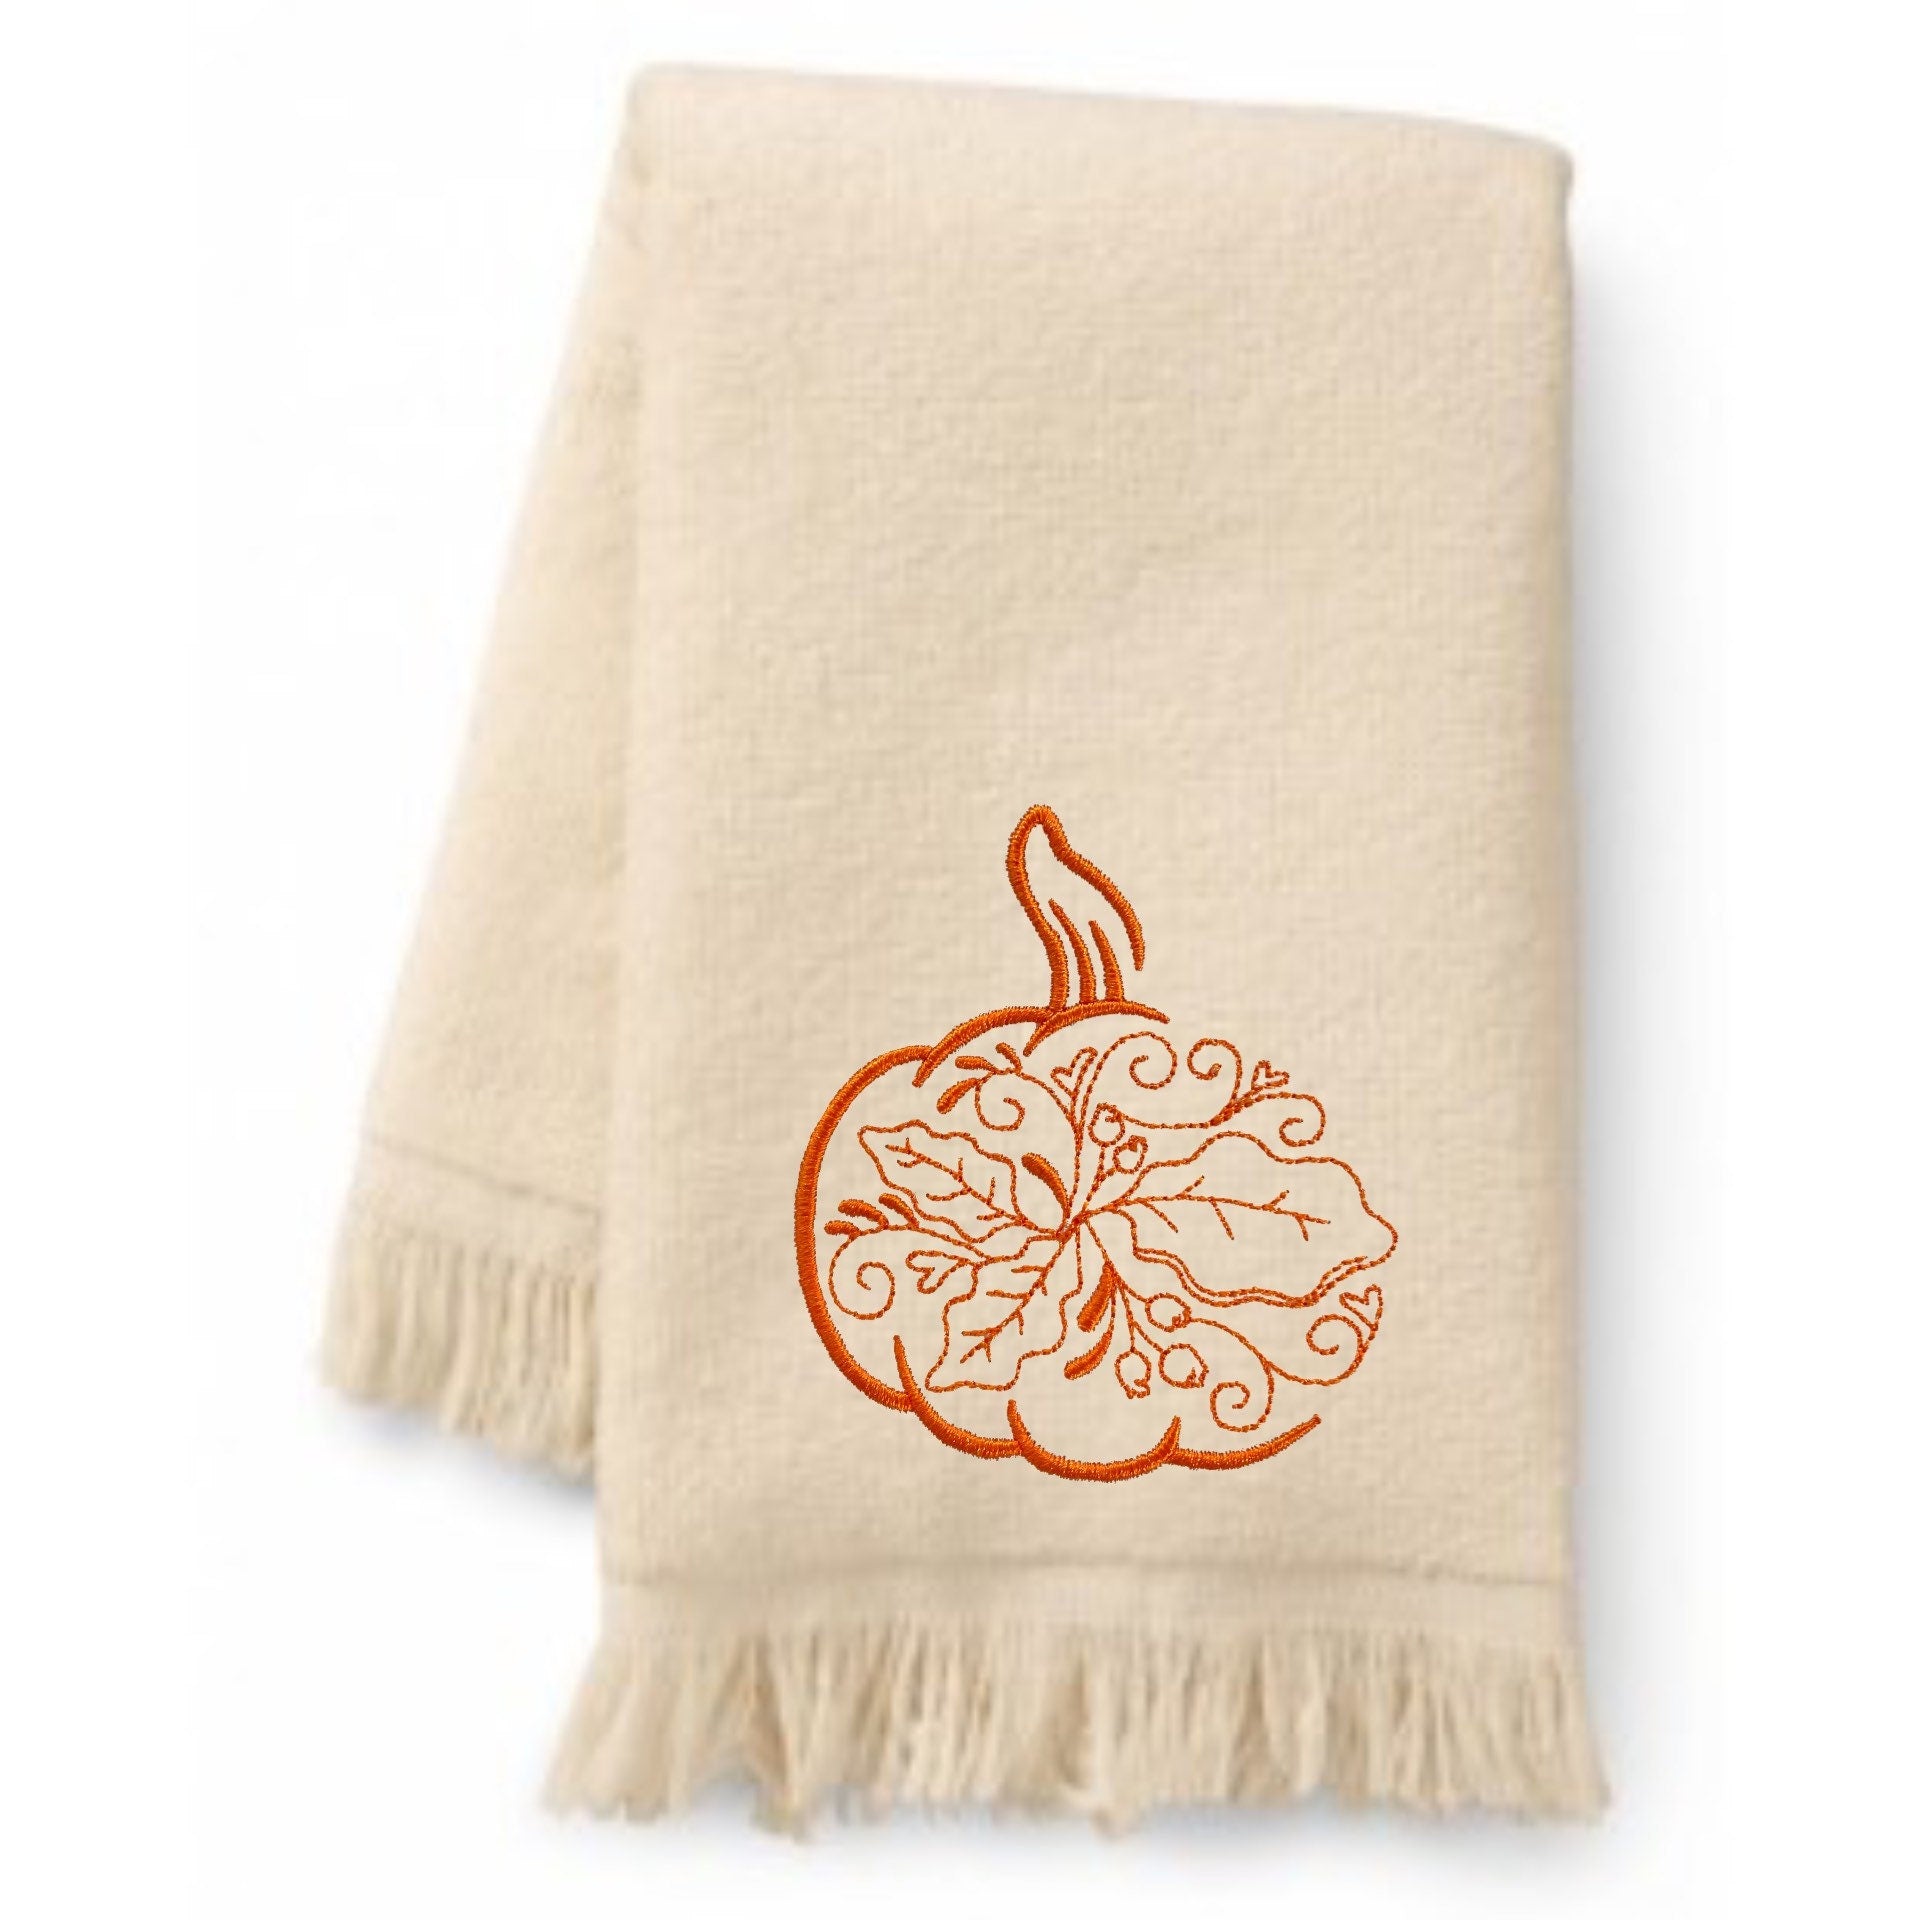 Monogrammed White Cotton Bath and Hand Towels